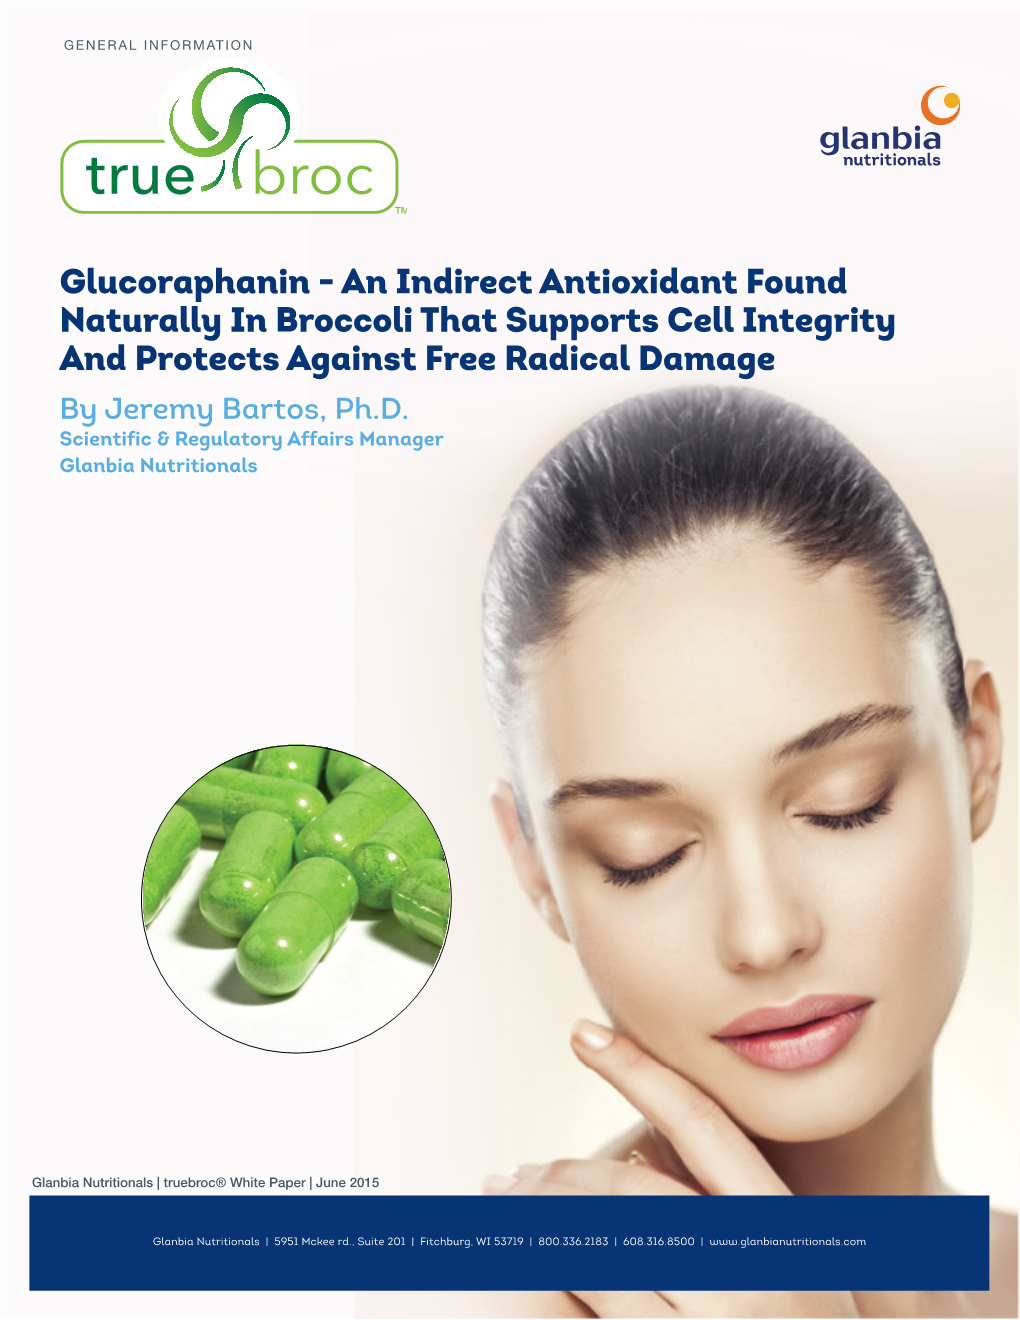 Glucoraphanin - an Indirect Antioxidant Found Naturally in Broccoli That Supports Cell Integrity and Protects Against Free Radical Damage by Jeremy Bartos, Ph.D